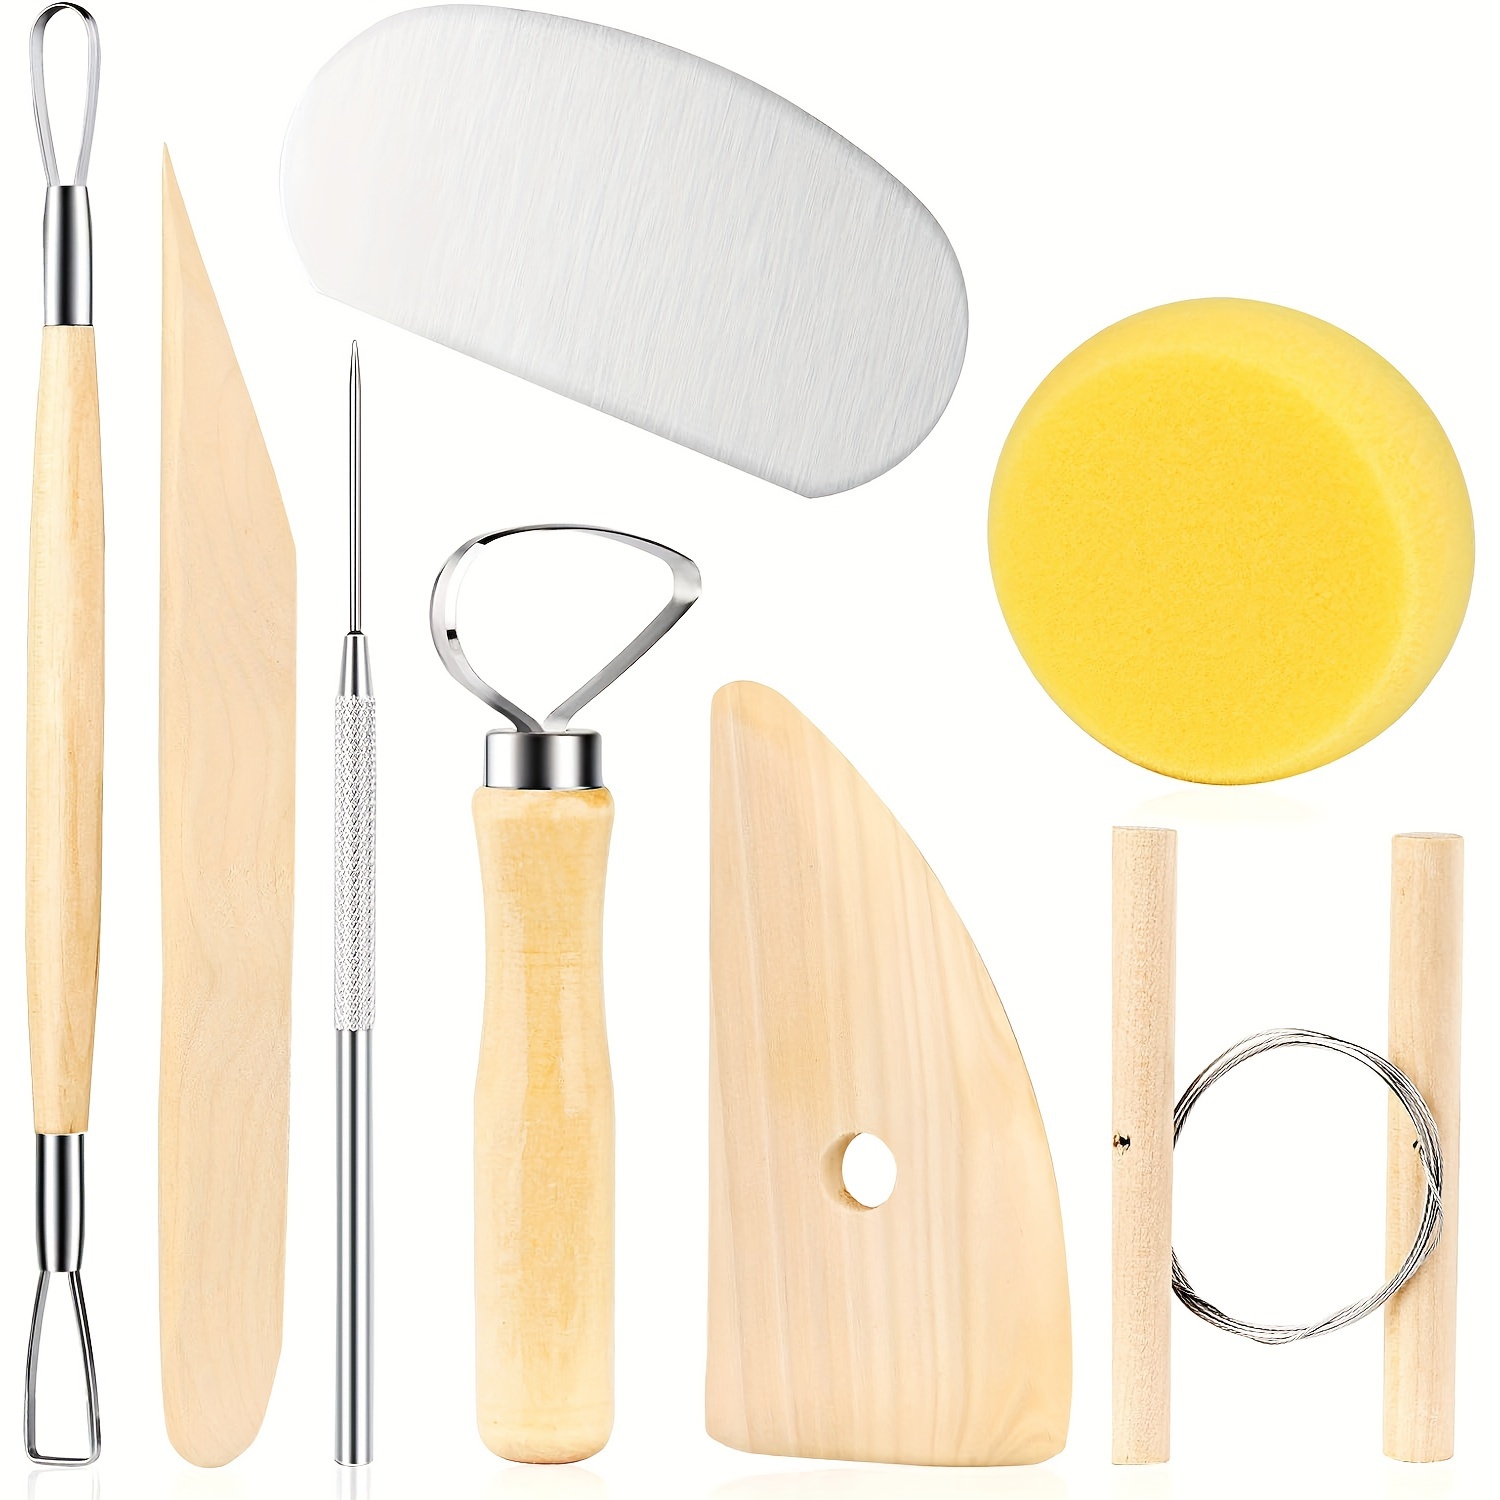 Wooden Pottery Sculpting Clay Cleaning Tool Set, Includes Clay